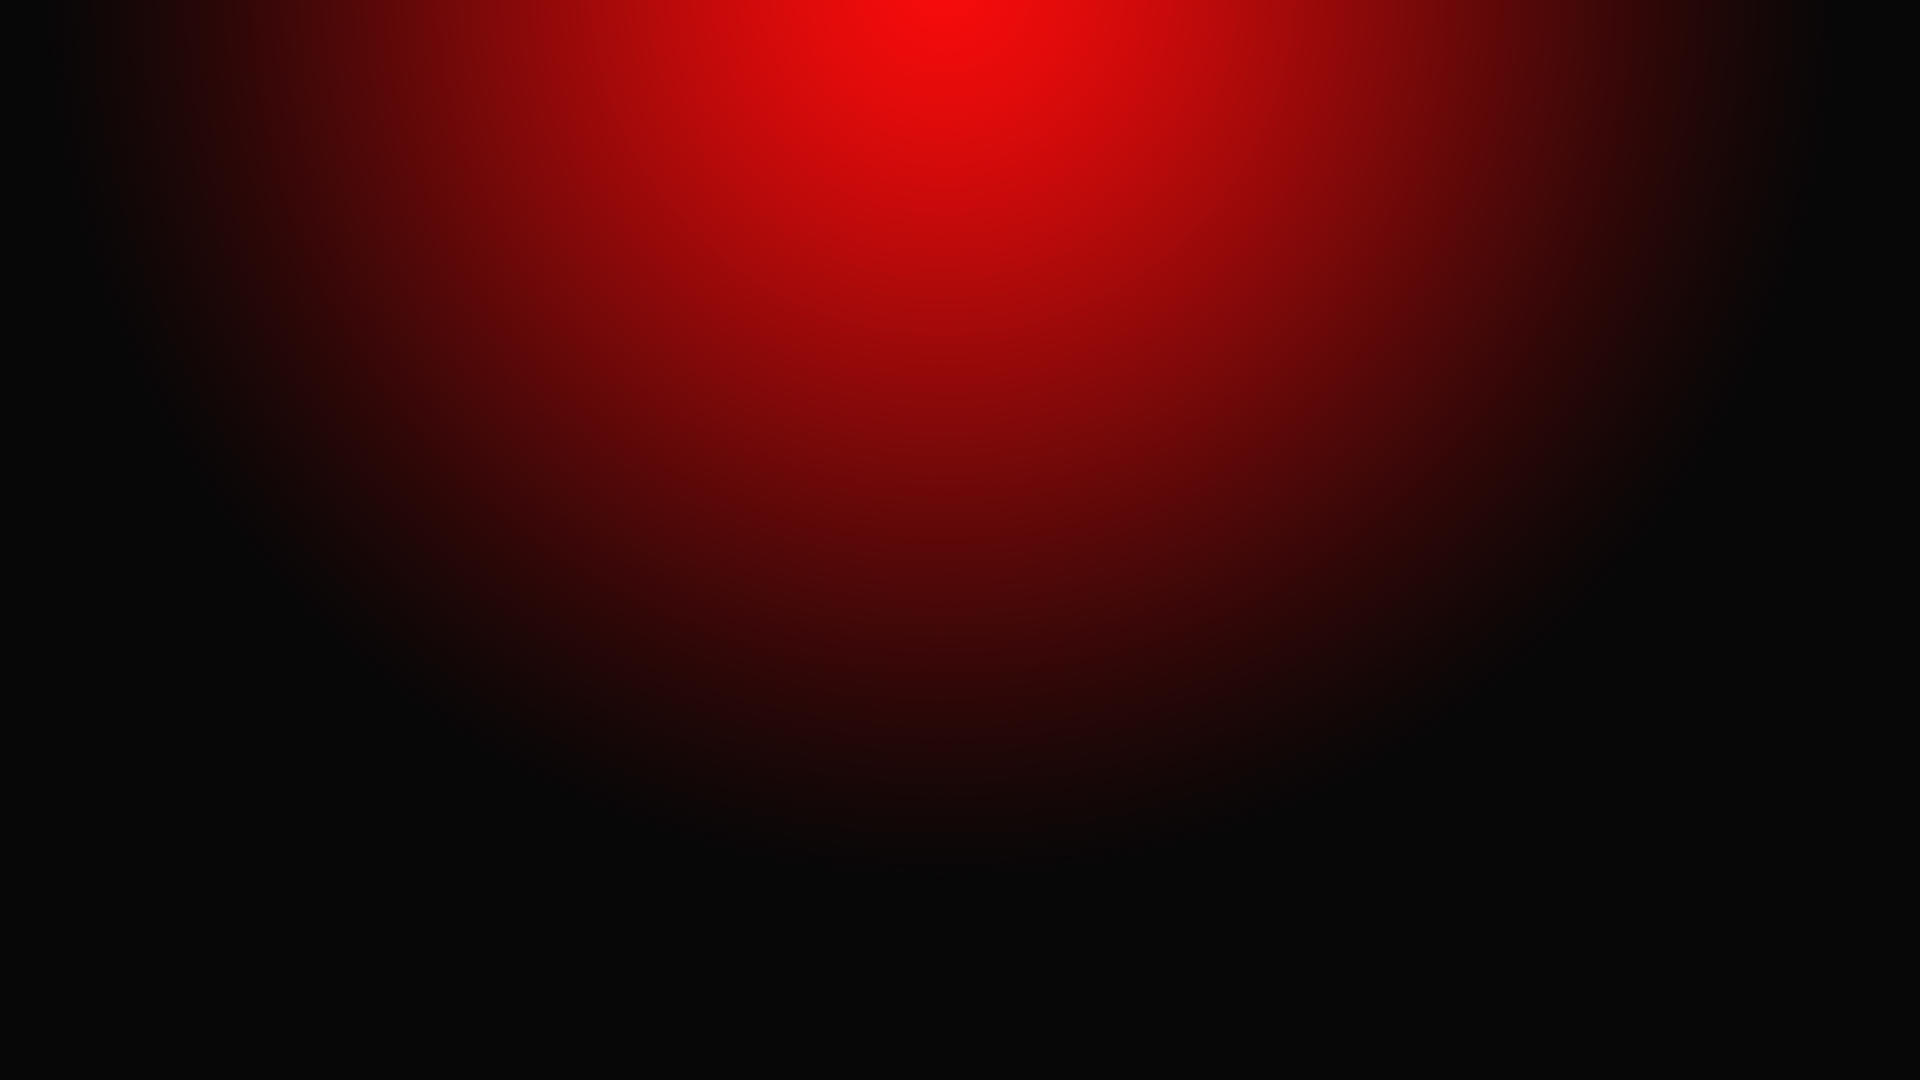 Red And Black Background Wallpaper. HD Wallpaper